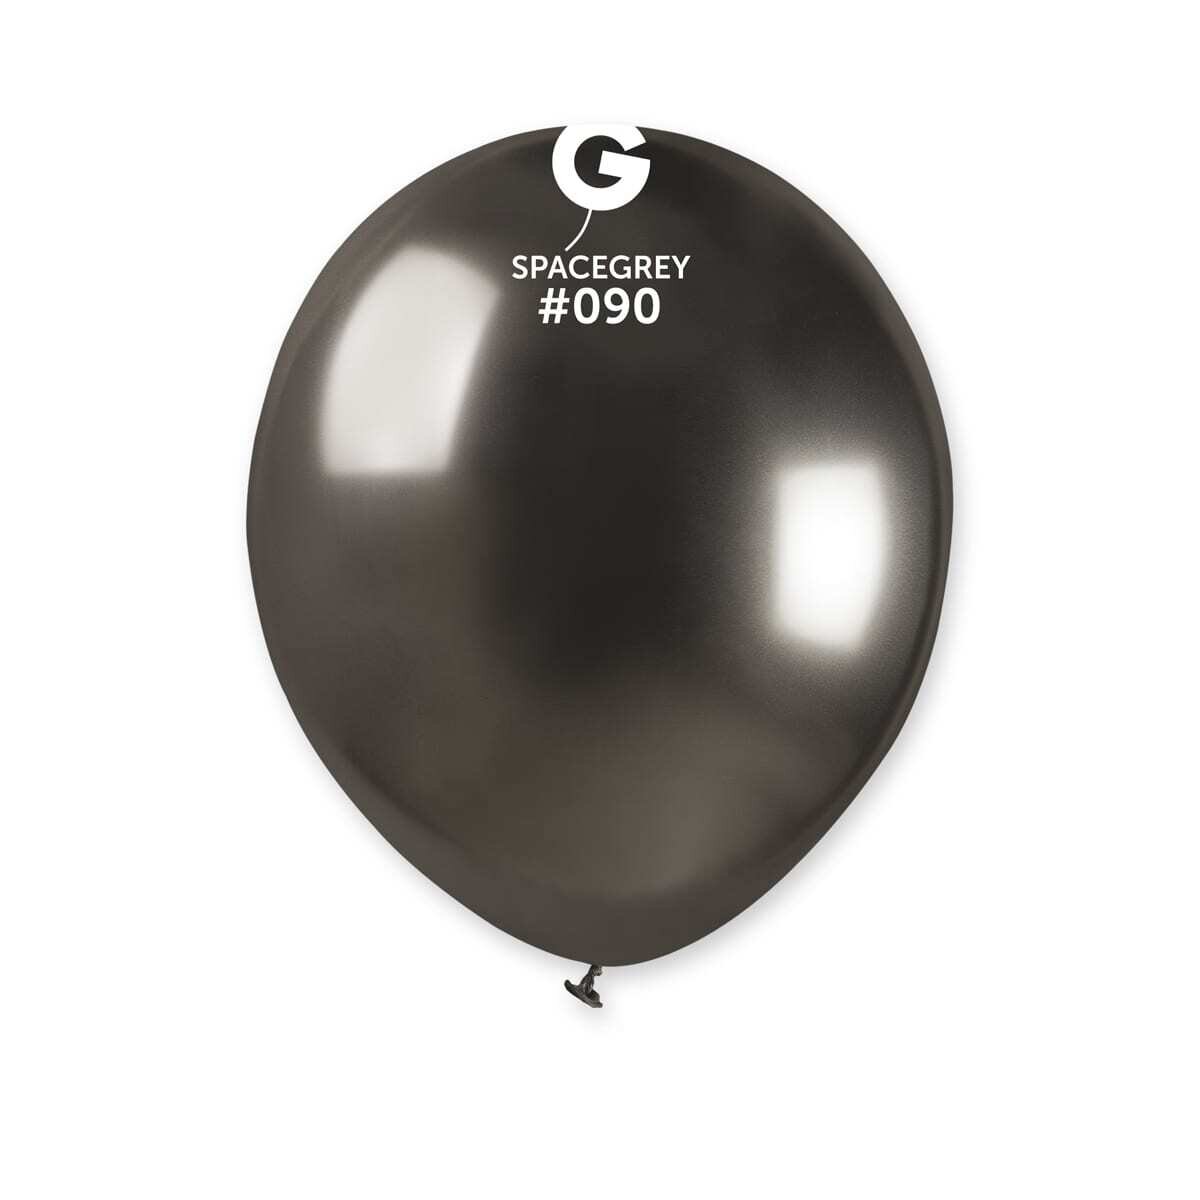 Gemar Latex Balloons Shiny Space grey #090 5in - 50 pieces